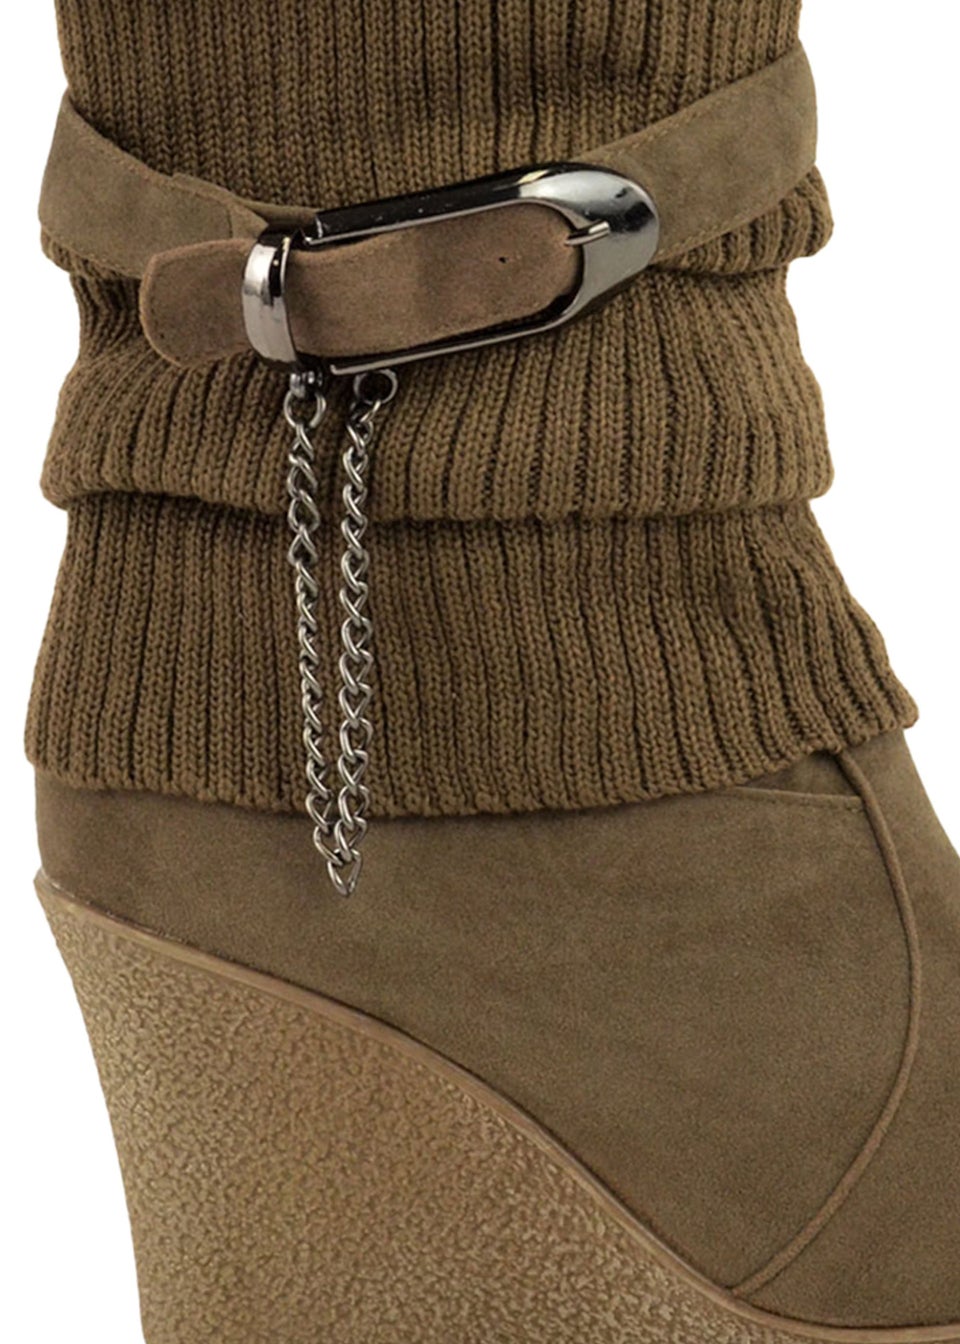 Where's That From Khaki Suede Bryony Wedge Heel Ankle Boots